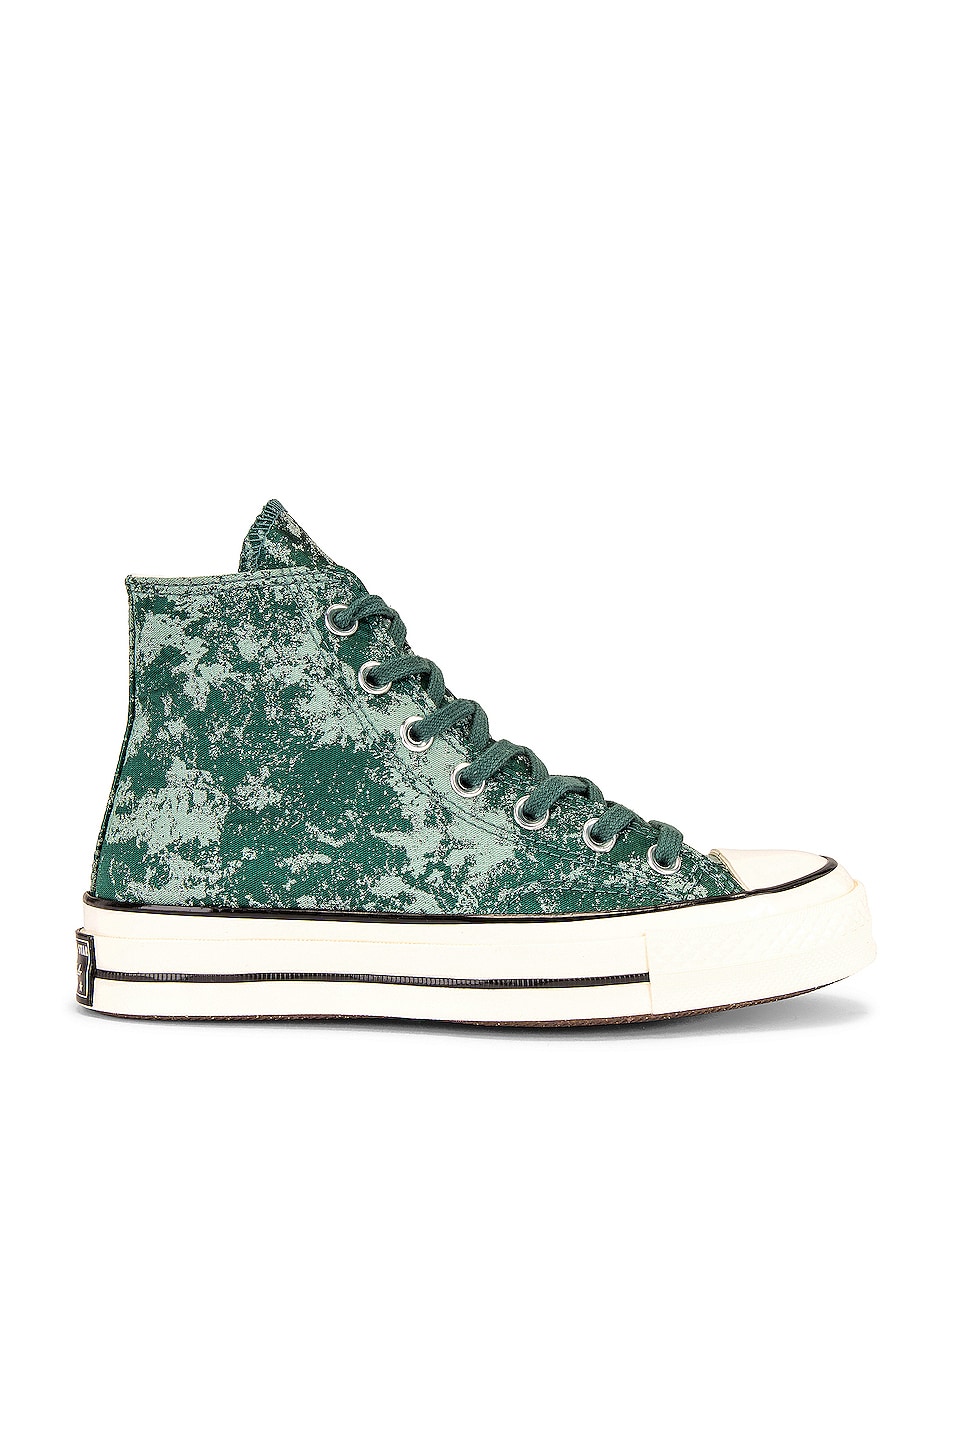 Image 1 of Converse Chuck 70 Hi Sneaker in Forest Pine, Cool Sage, & Egret